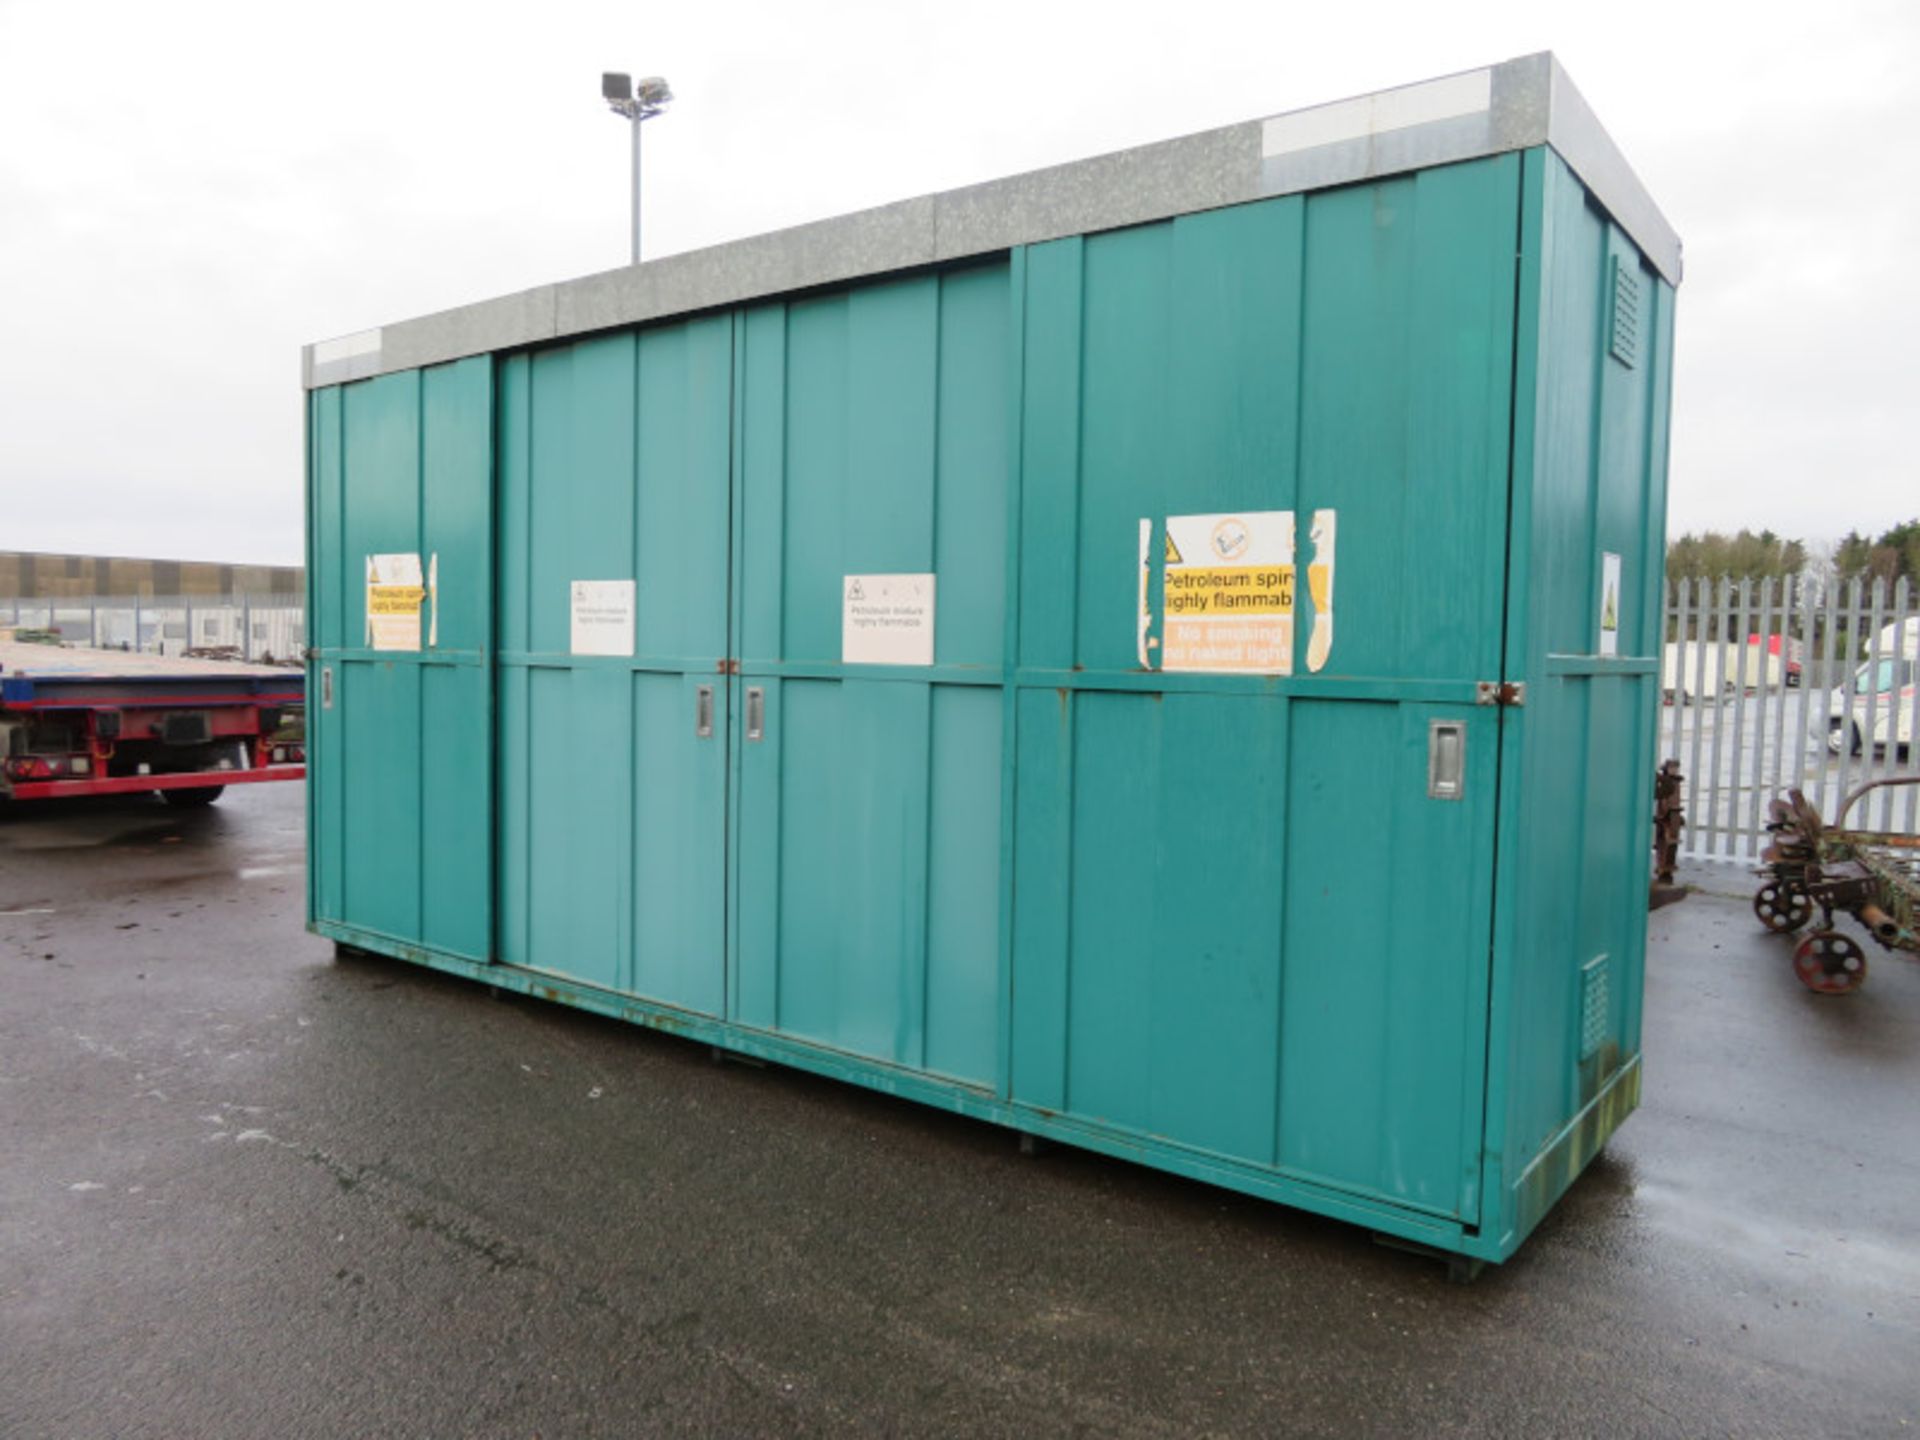 2 Tier bunded chemical storage container with 4 sliding doors - 600ft x 165 x 320cm Extern - Image 2 of 7